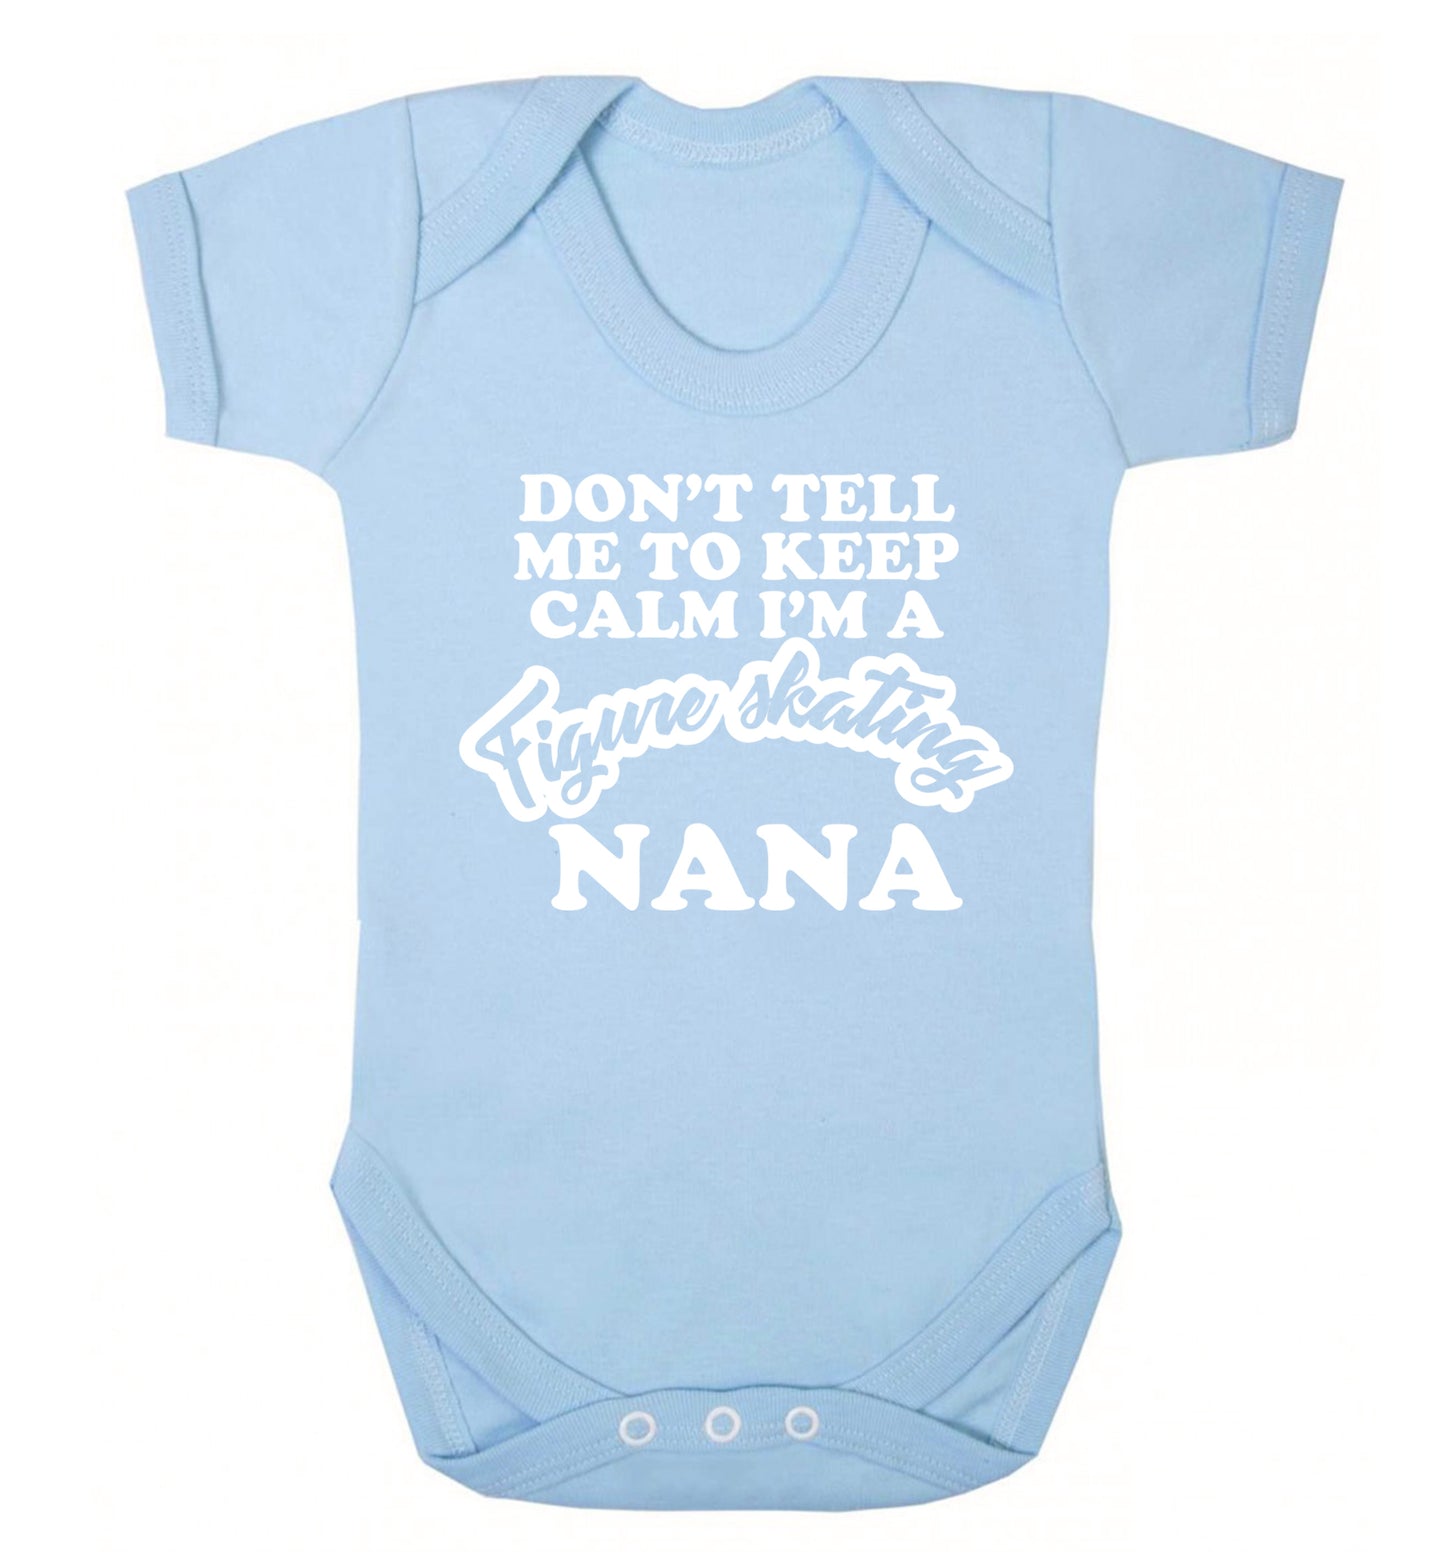 Don't tell me to keep calm I'm a figure skating nana Baby Vest pale blue 18-24 months